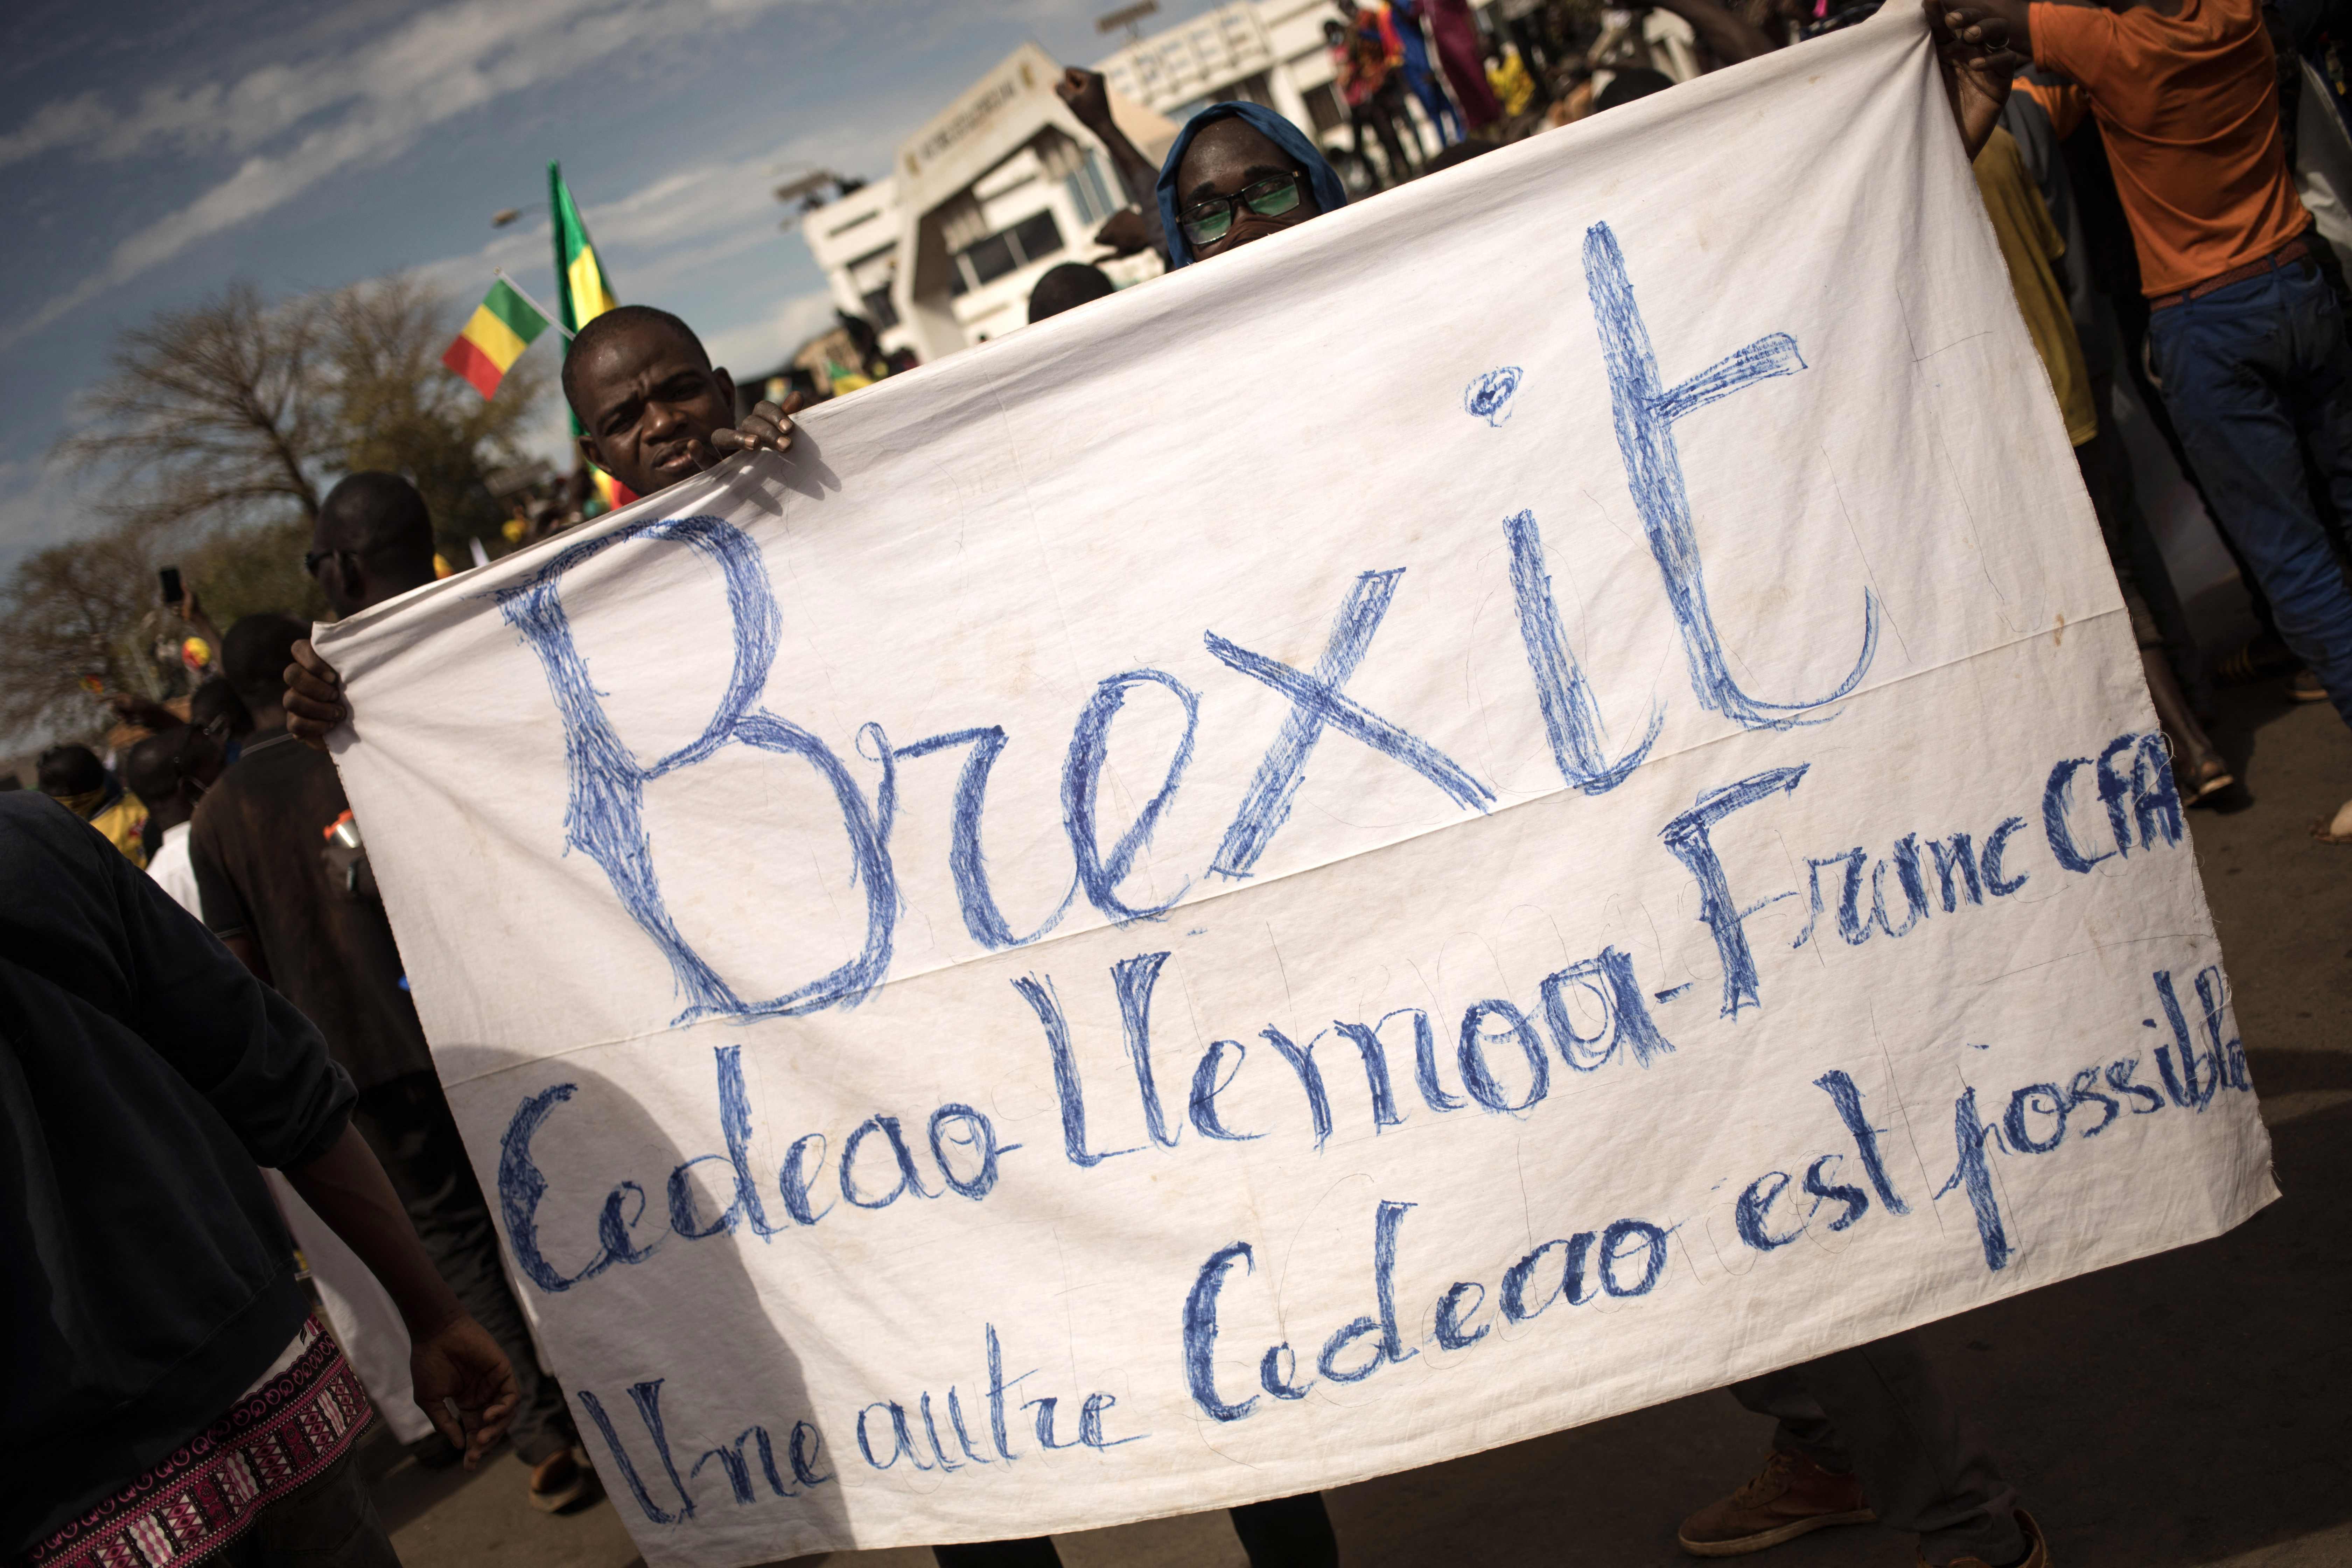 Young demonstrators hold a banner calling for a ‘Brexit’ from the Economic Community of West African States during a mass demonstration to protest against sanctions imposed on Mali